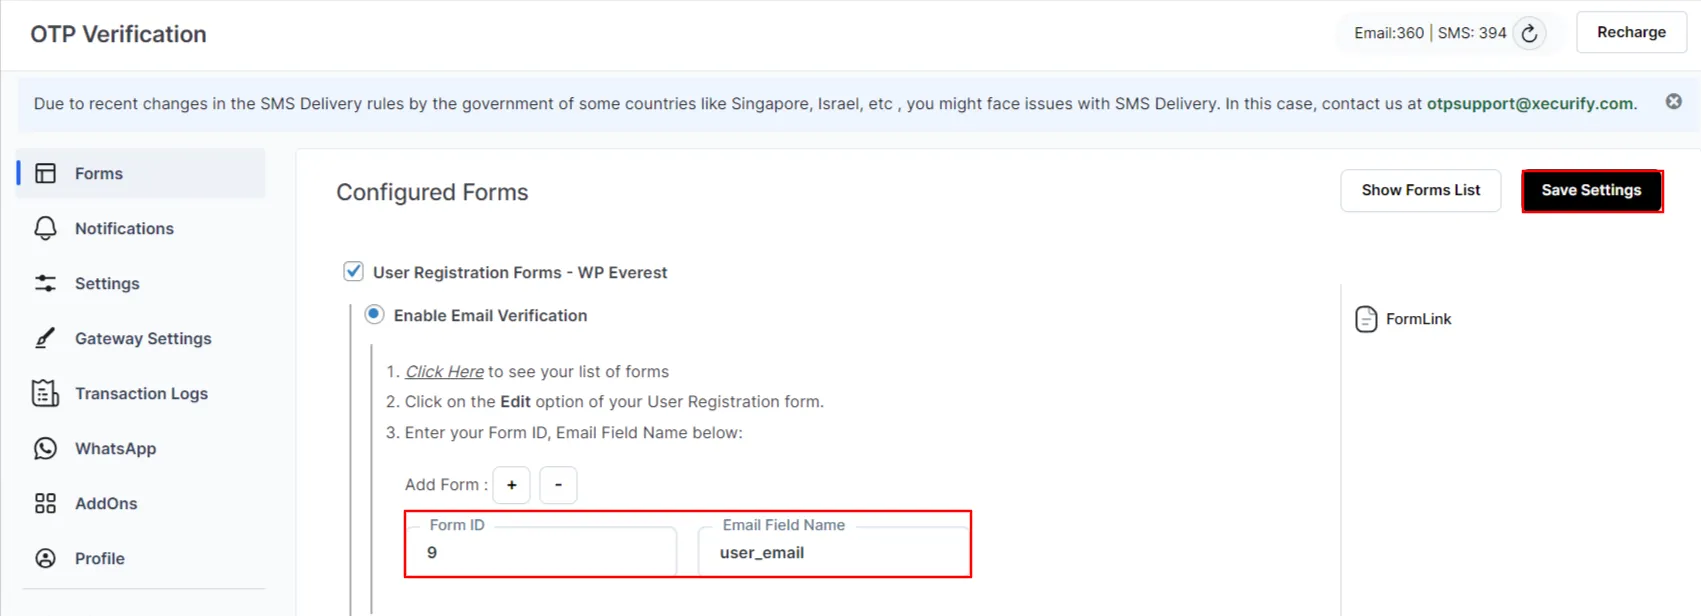 User Registration Forms - WP Everest - Click Save Settings button